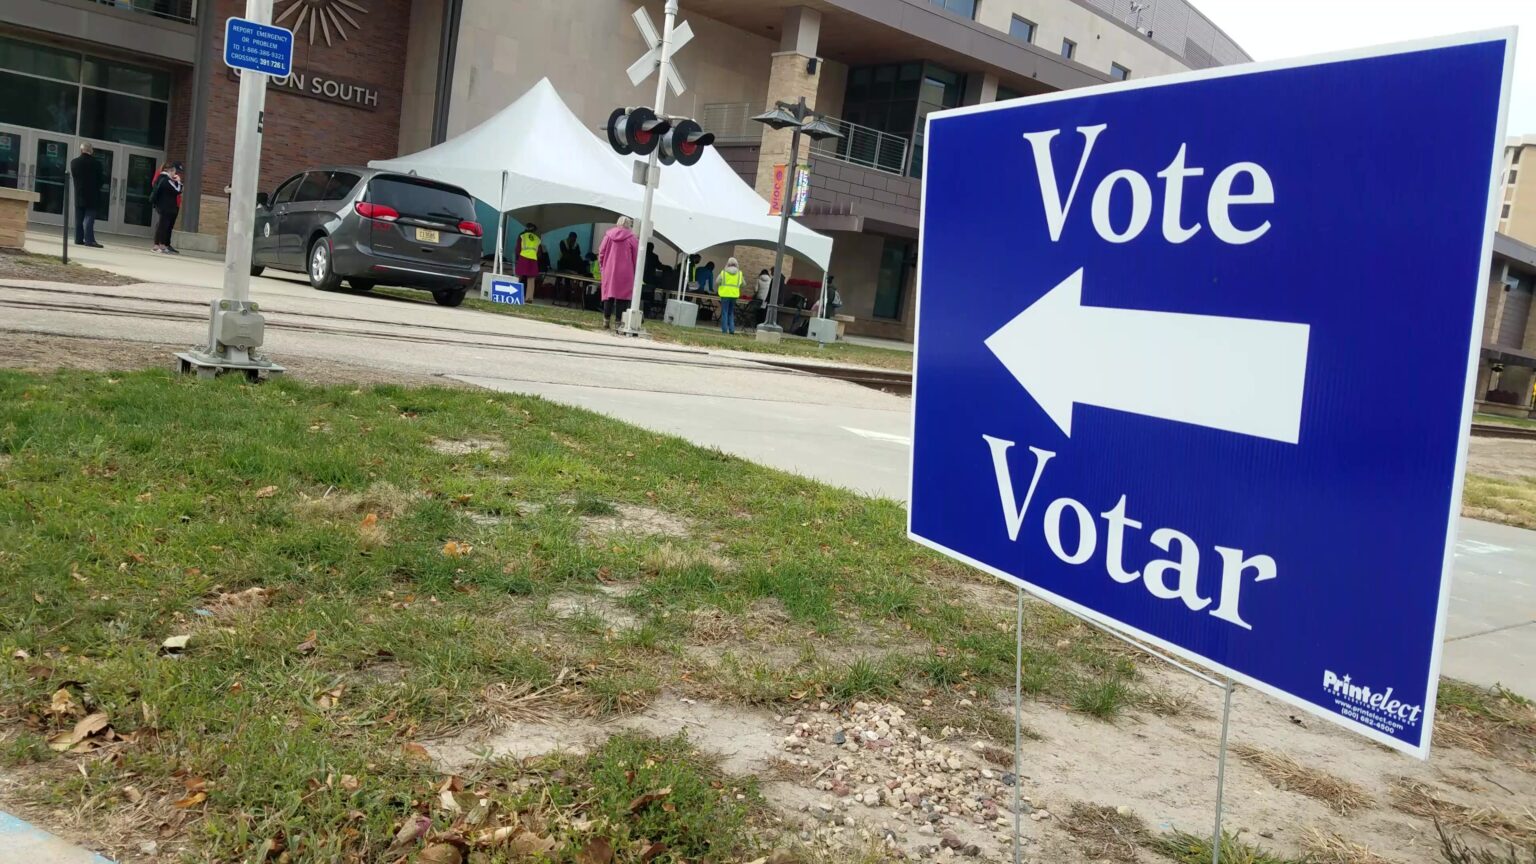 A sign with an arrow and the words Vote and Votar is placed in a patch of lawn across the street from a building with a sign reading Union South and an outdoor canopy with people standing under and around it.